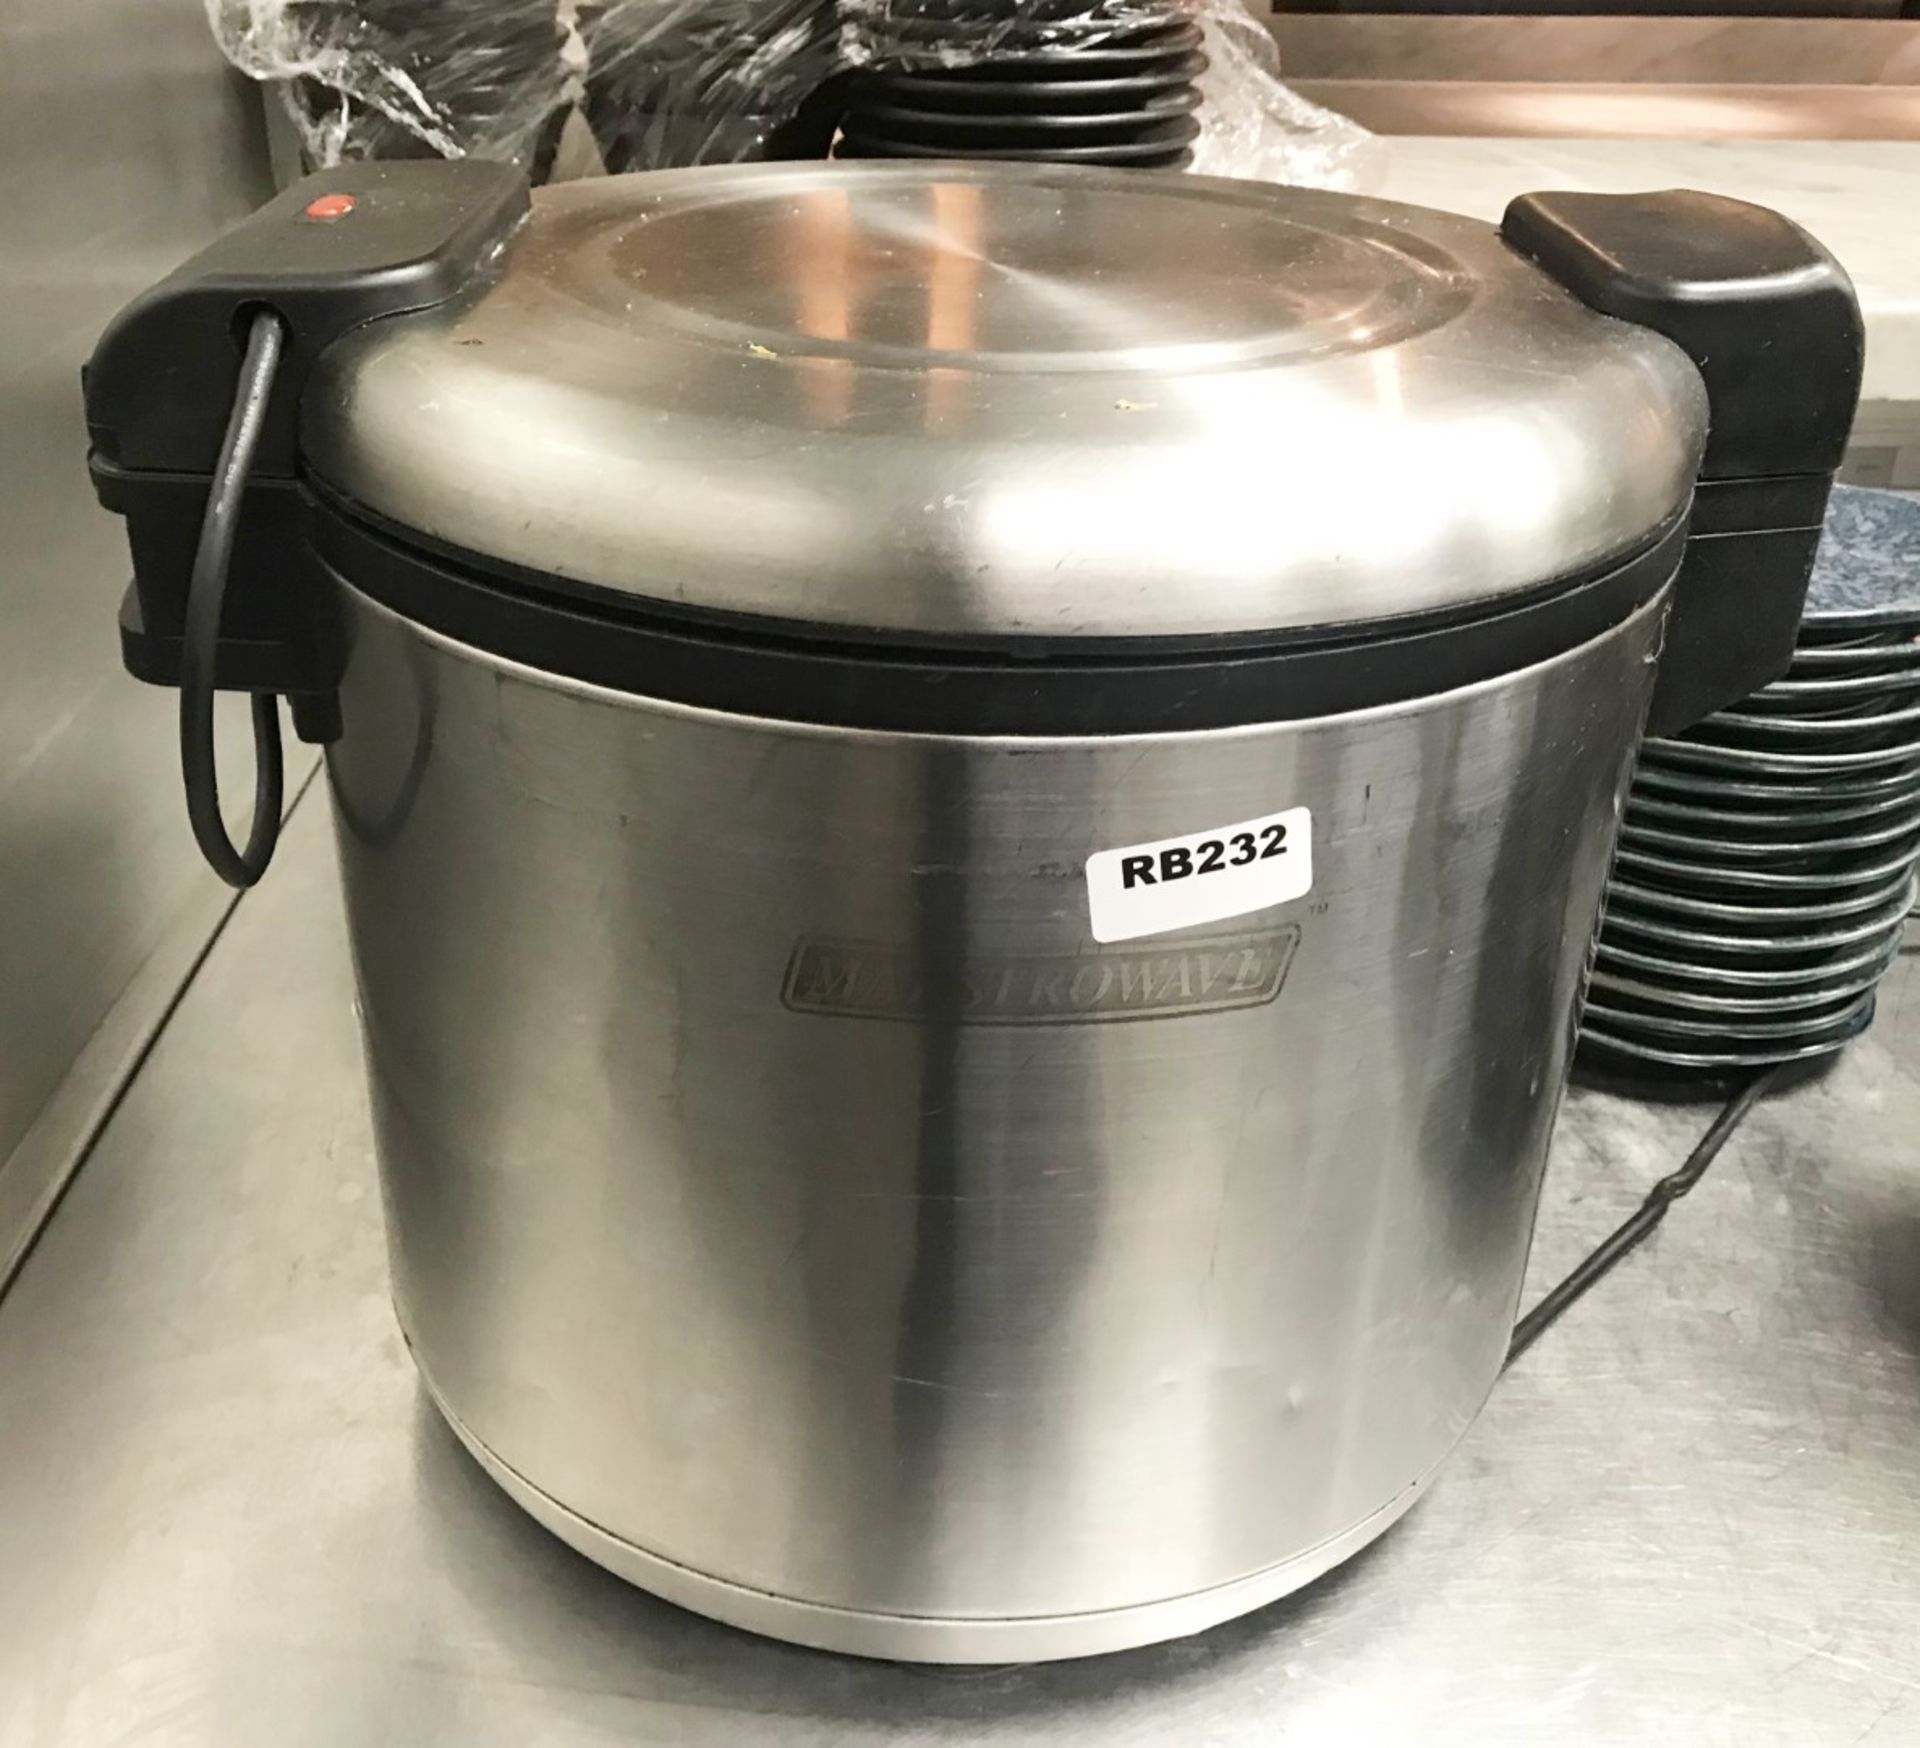 1 x Maestrowave Rice Cooker - Ref: RB232 - CL584 - Location: London W1F IN2C12349